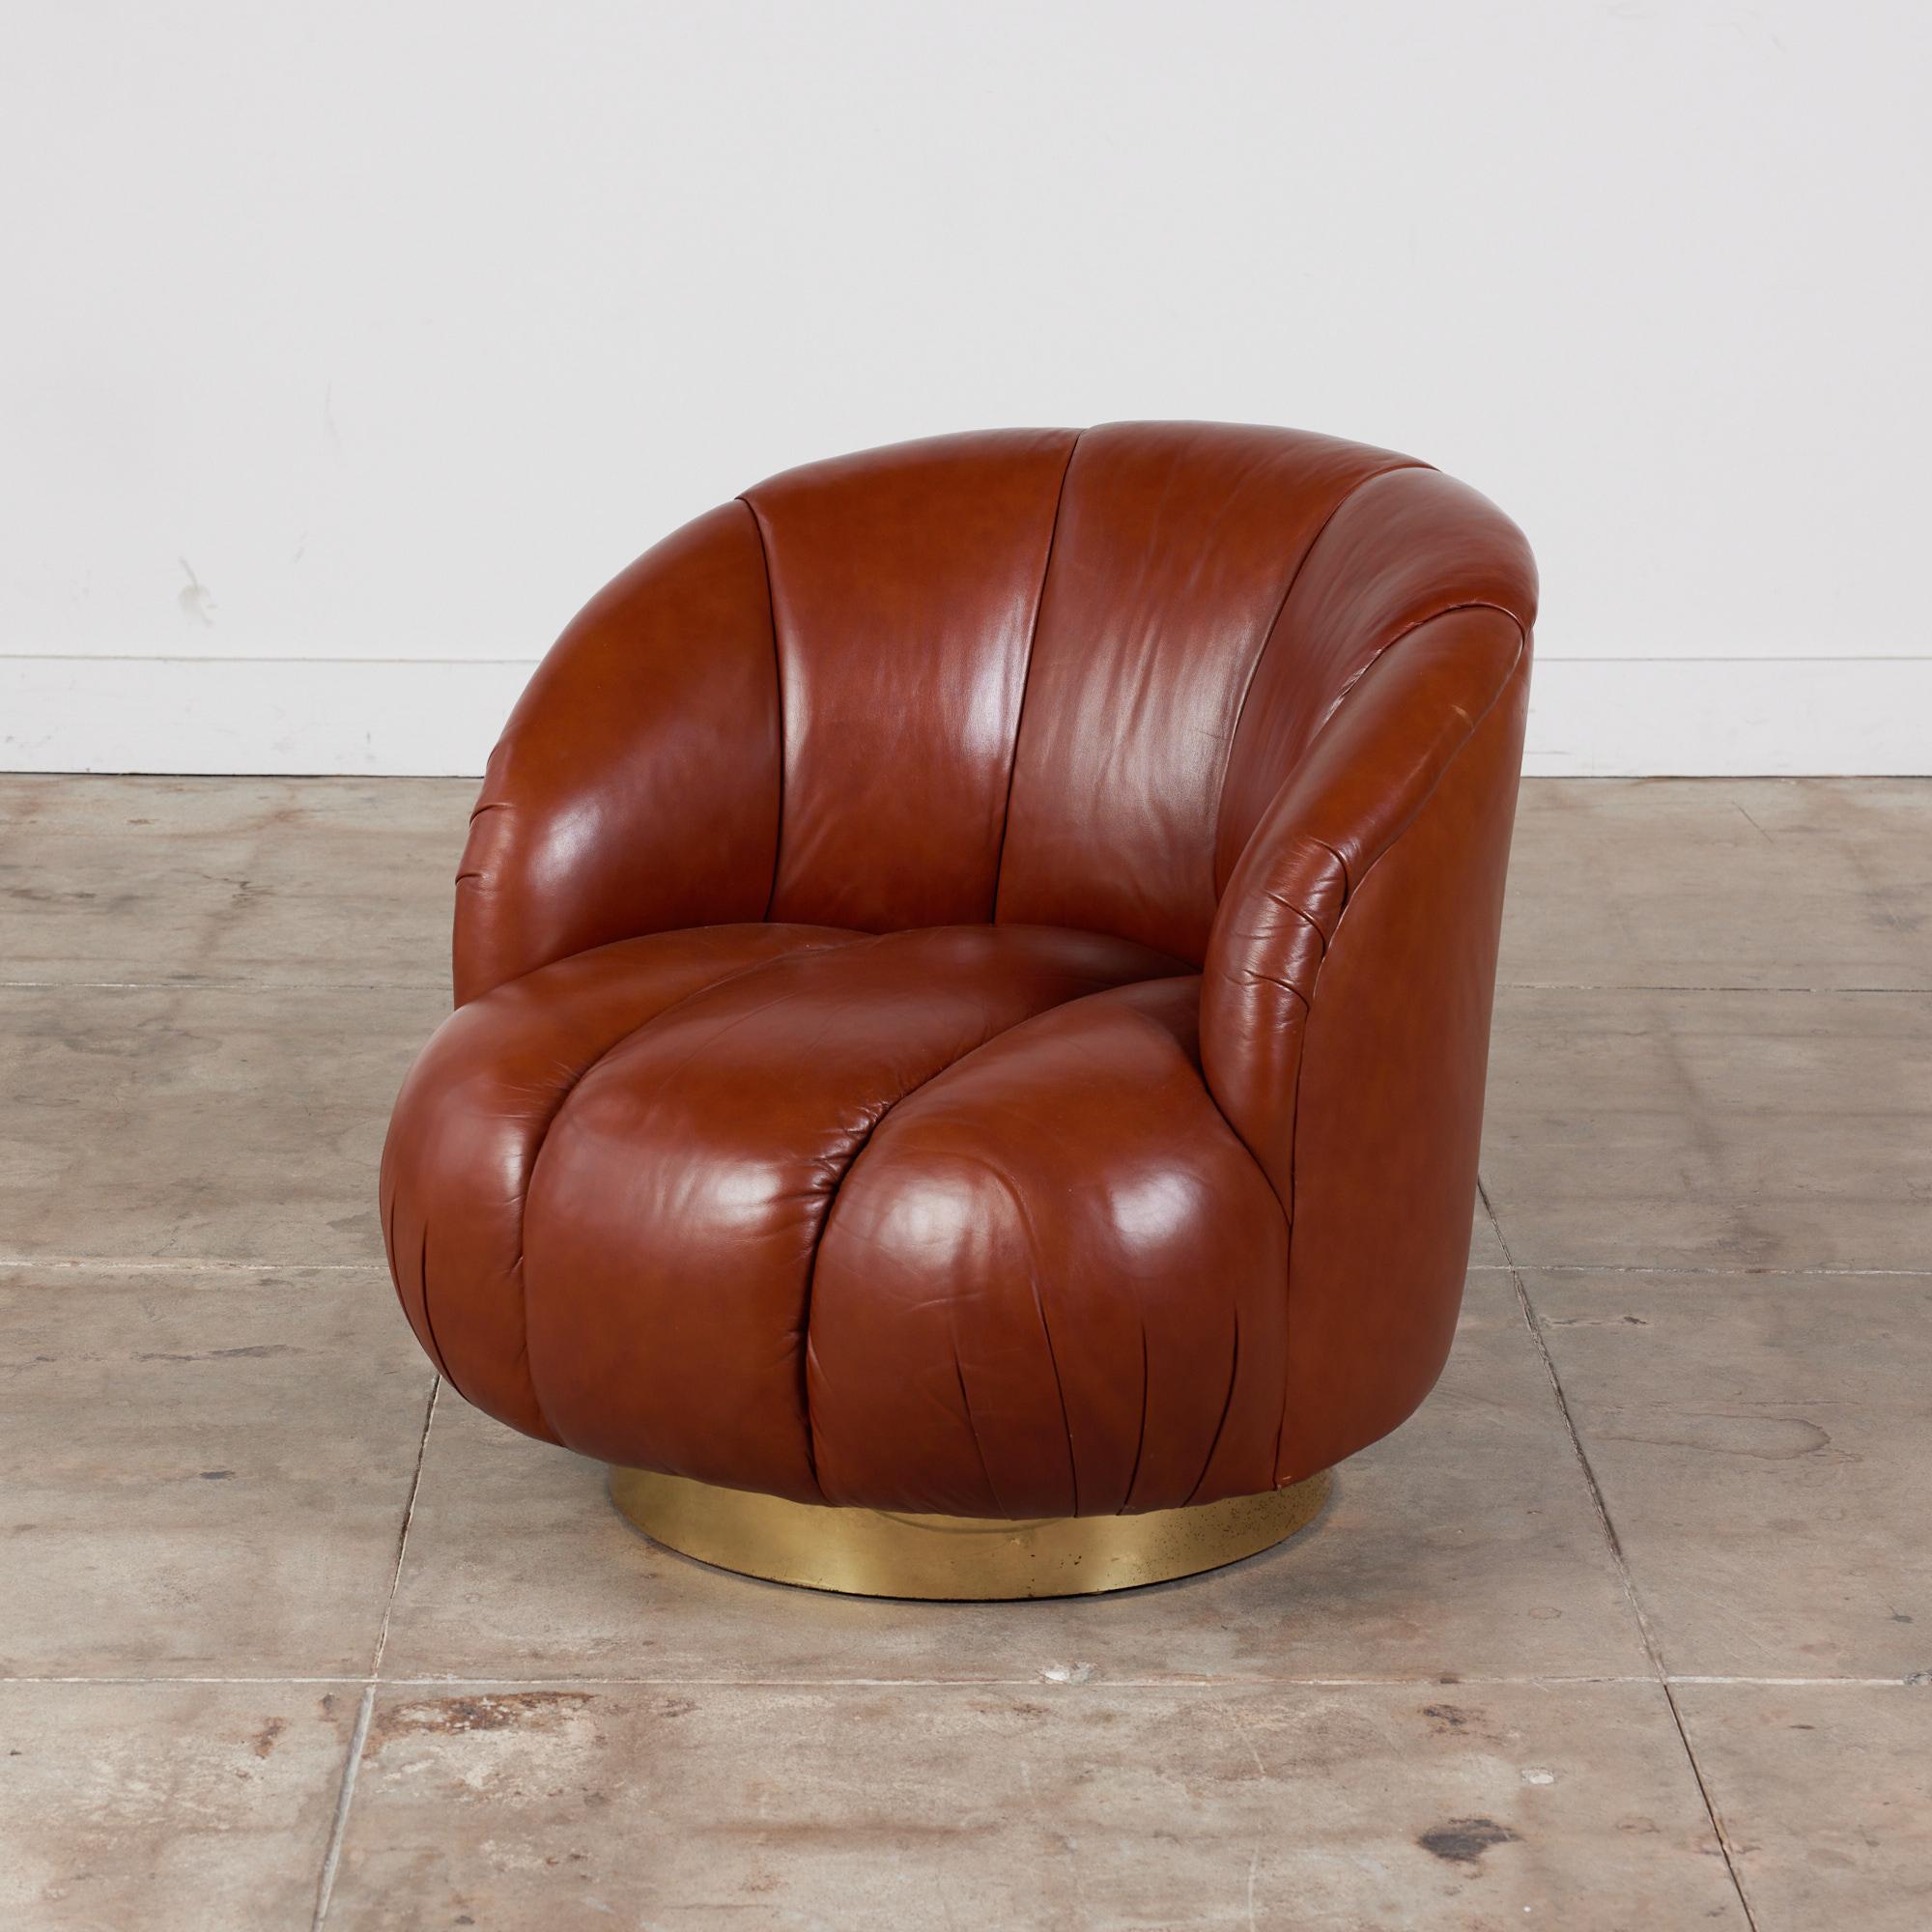 Karl Springer style swivel chair, c.1980s. The chair features soft curves throughout and upholstered in a rich tufted brown leather. The rounded seat back offers comfort and style. The chair rests on a simplistic brass round swivel base. 

Two